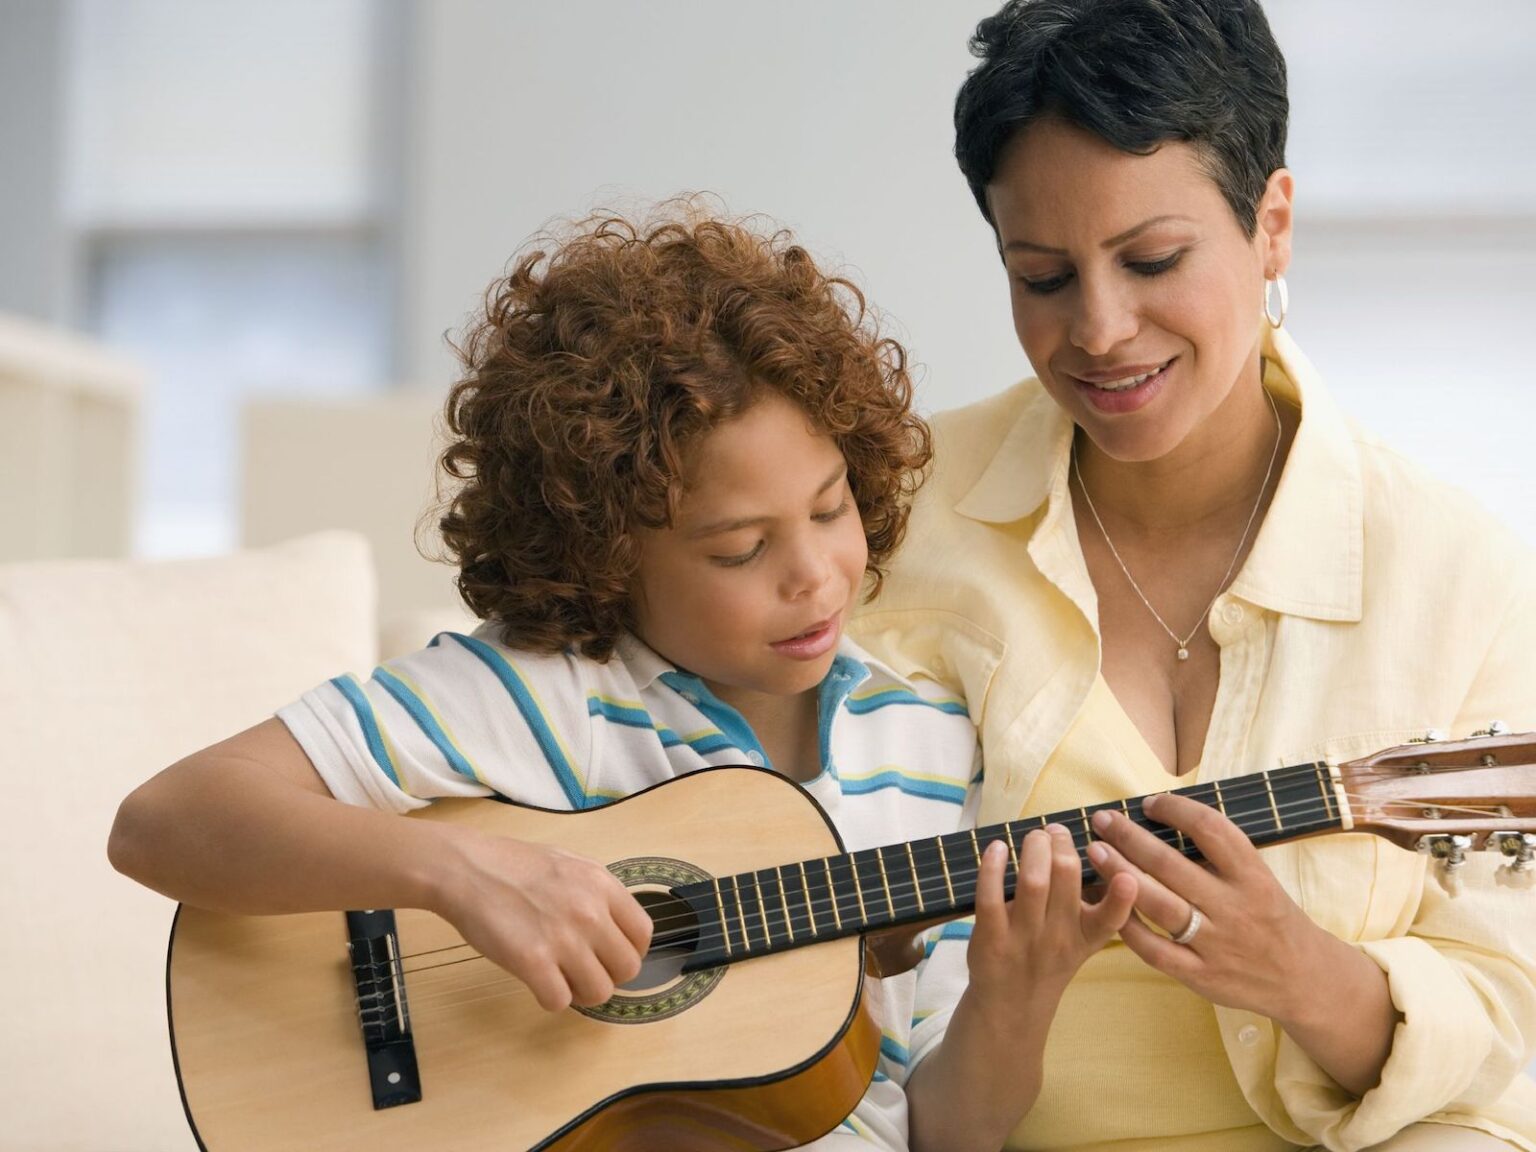 There's no perfect time for learning an instrument. However, we've seen multiple advantages of learning when we are young. Learn all the benefits here!